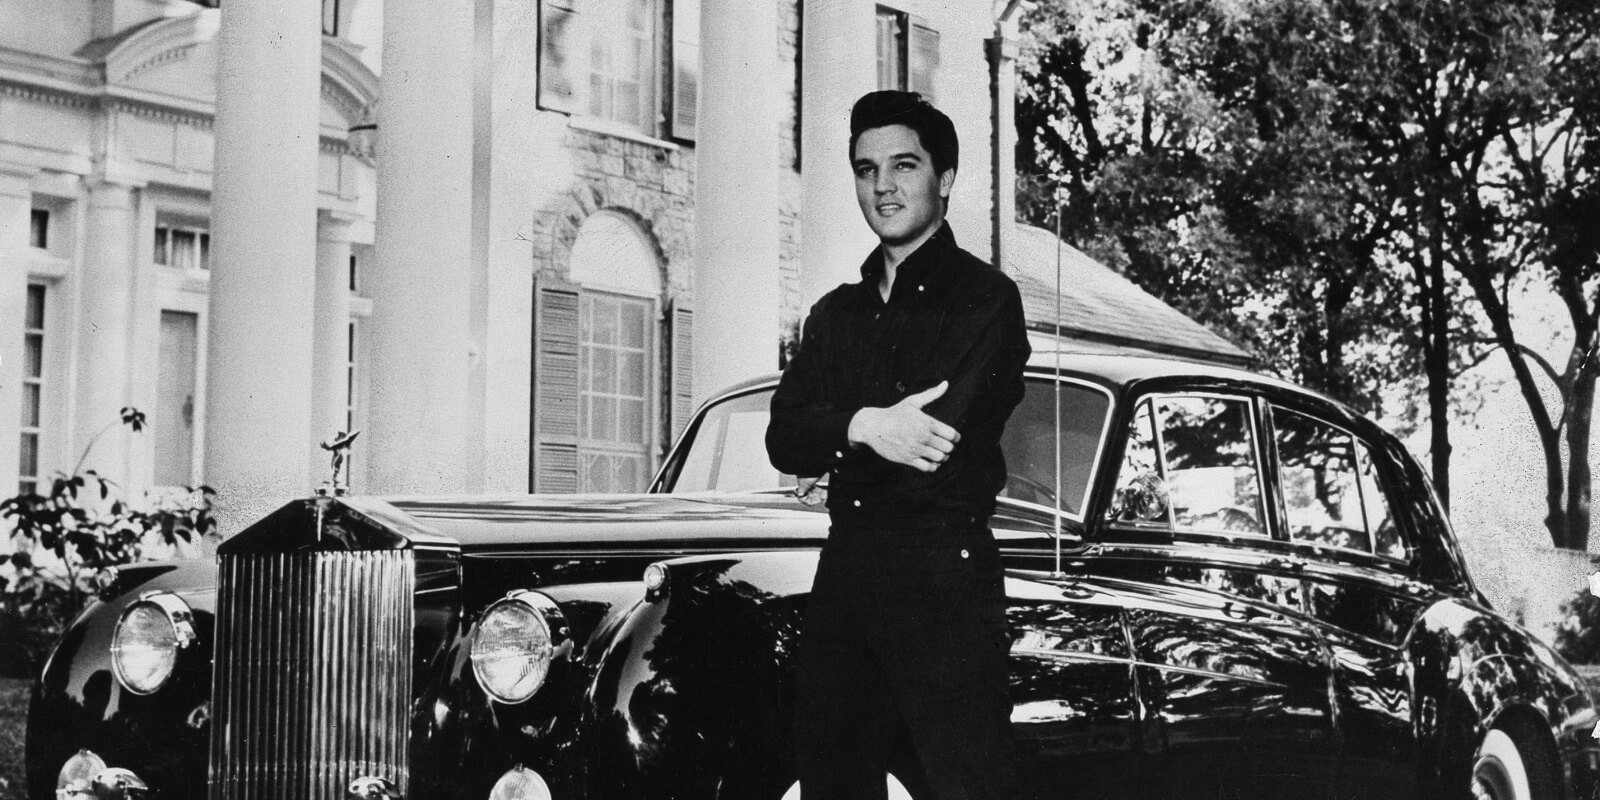 Elvis Presley poses in front of his Graceland home with a Rolls Royce automobile.